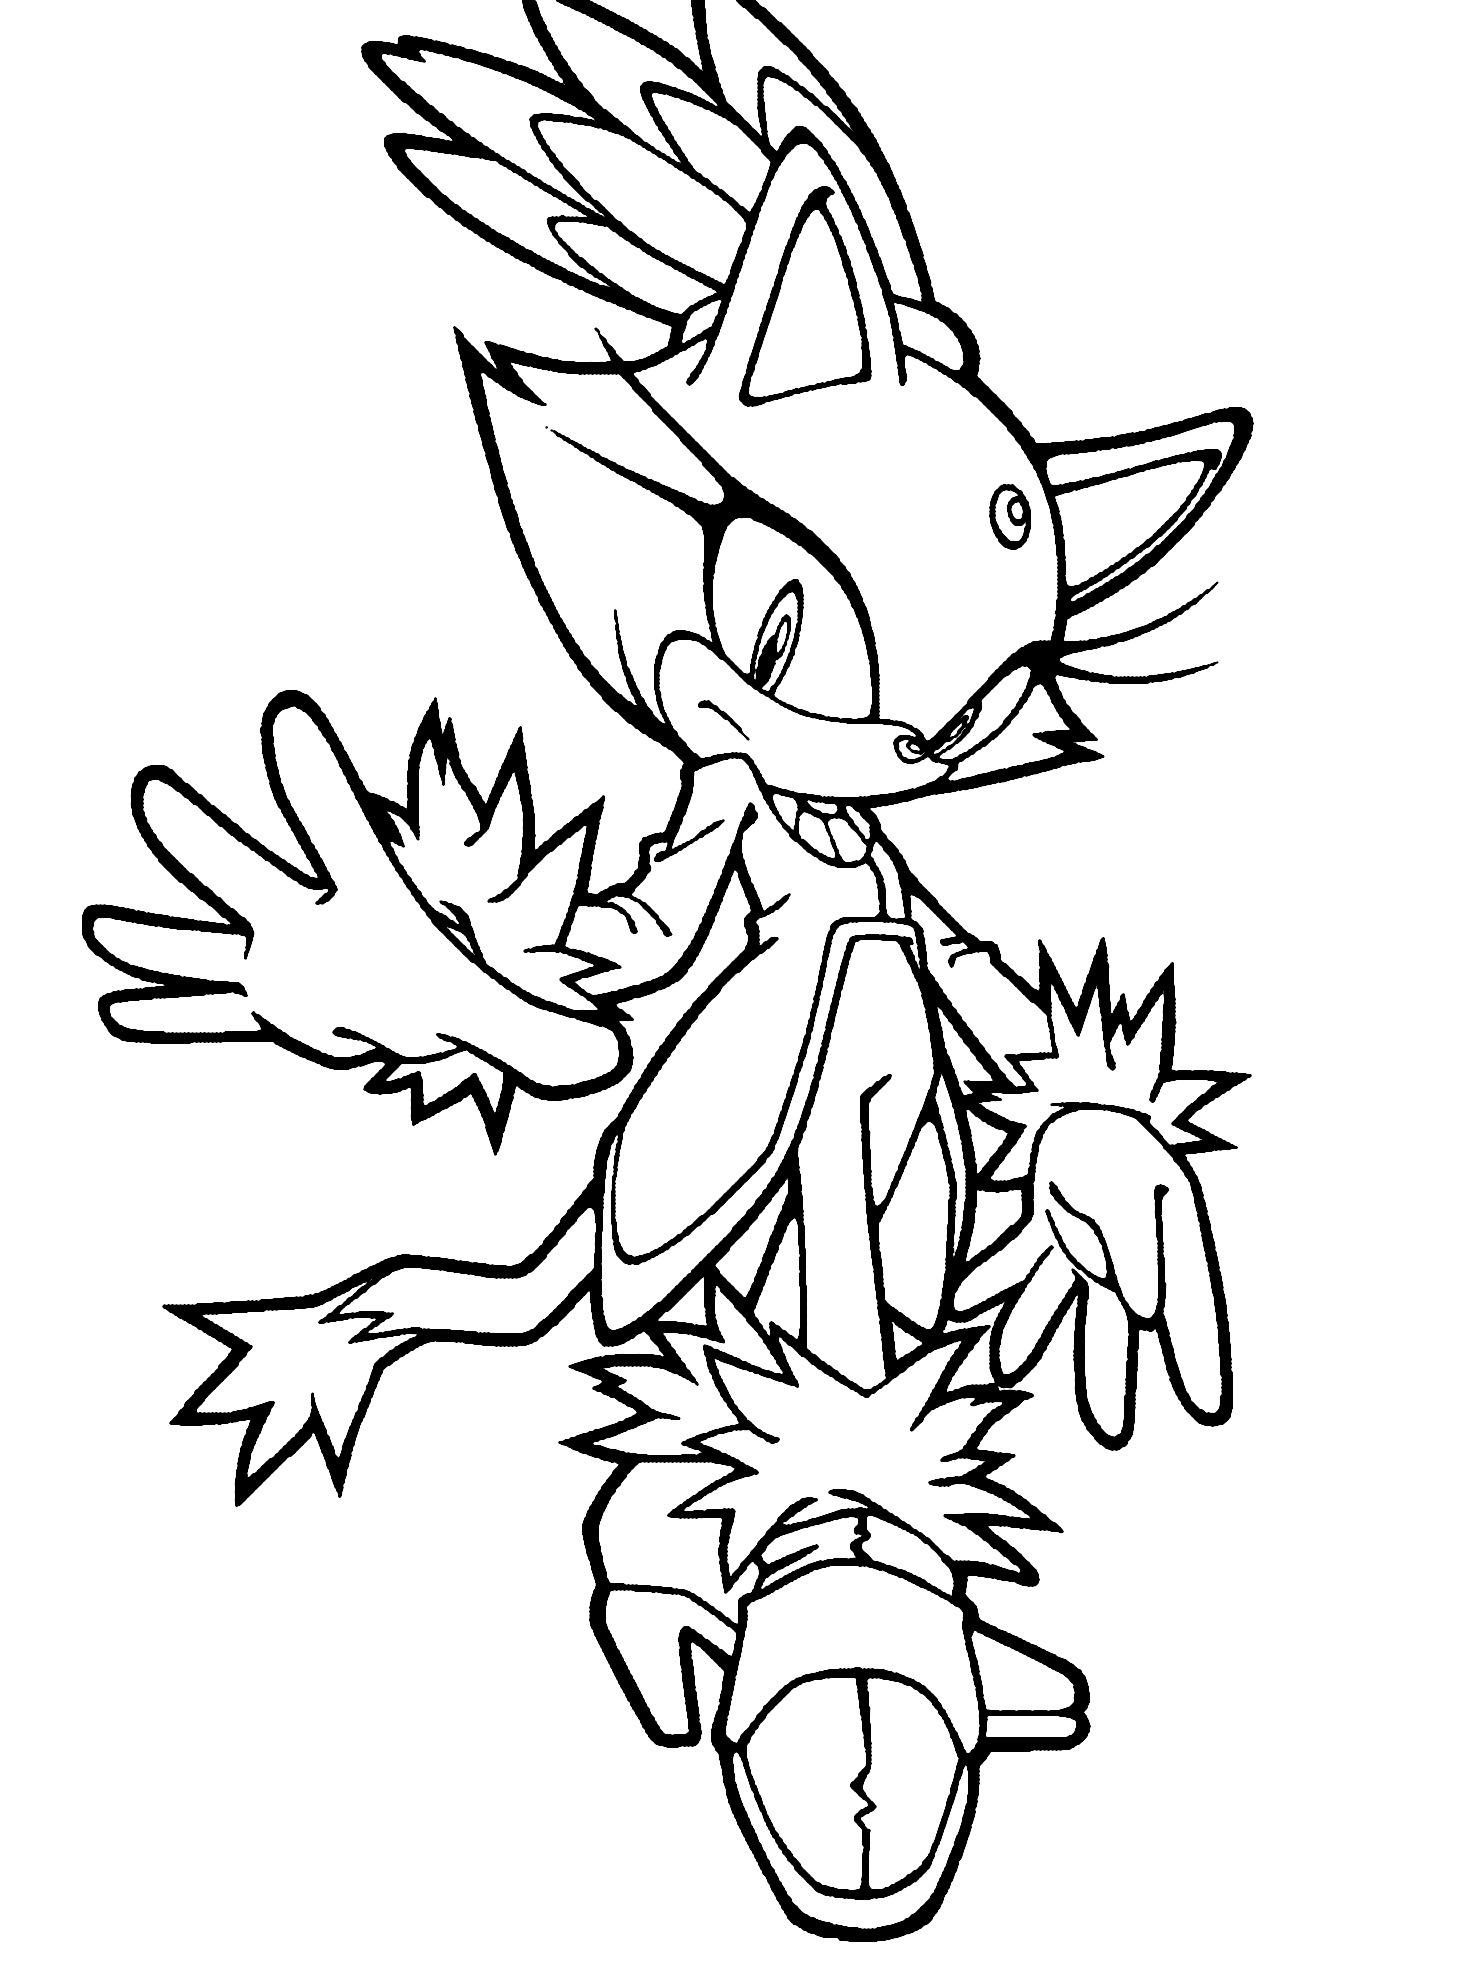 Coloring page - Blaze the Cat